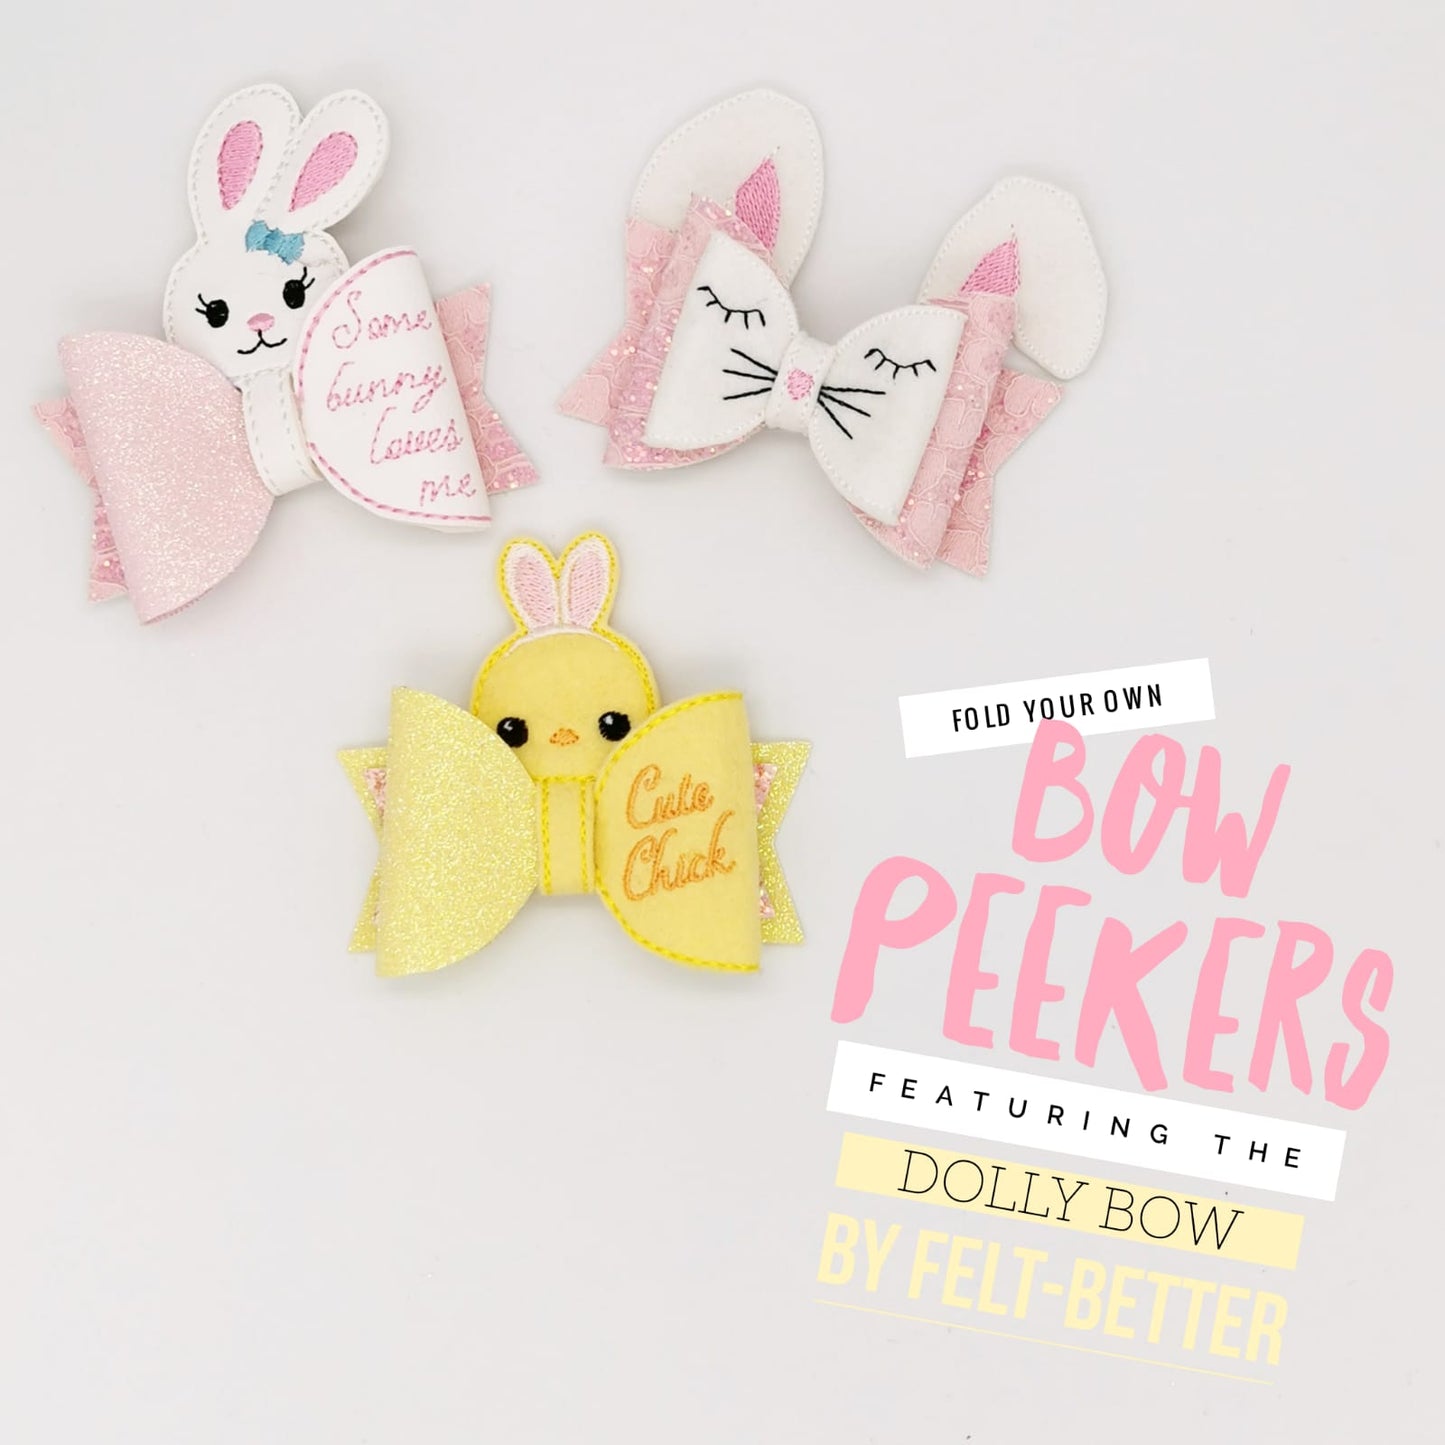 Fold Your Own Bunny Featuring the Dolly Bow by Felt Better